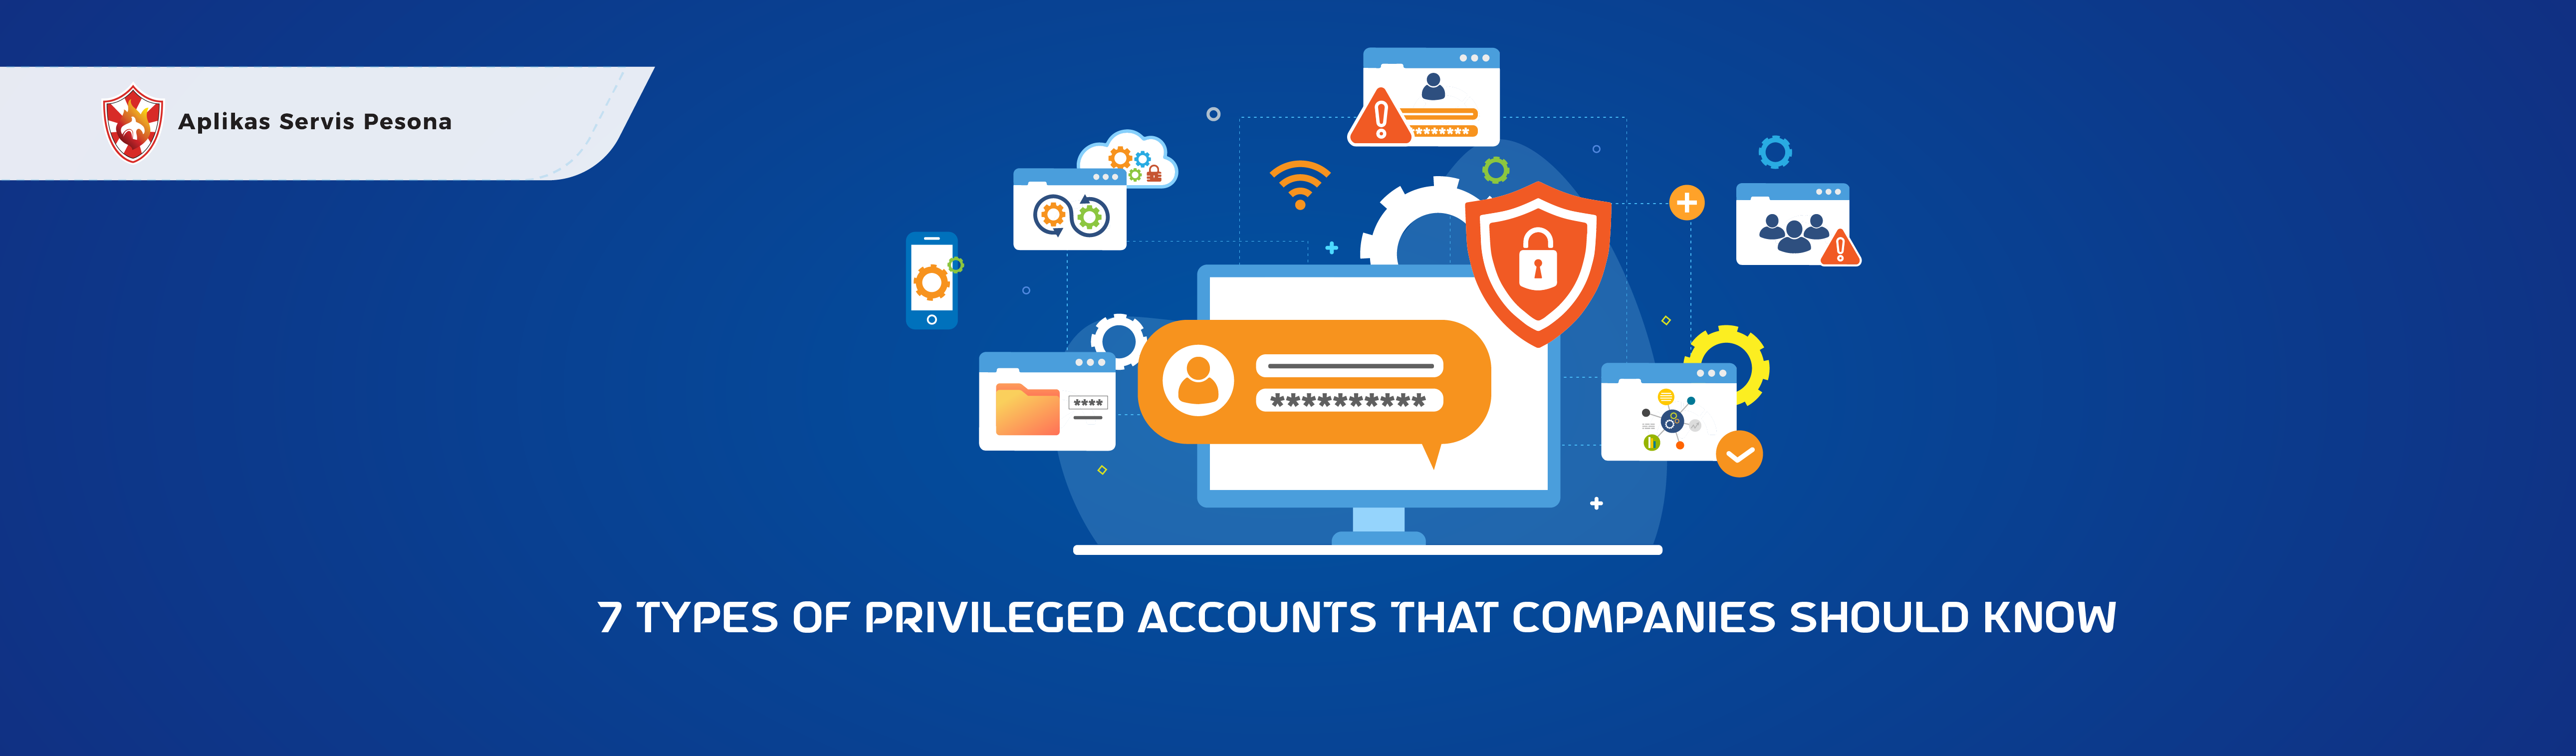 types of privileged accounts